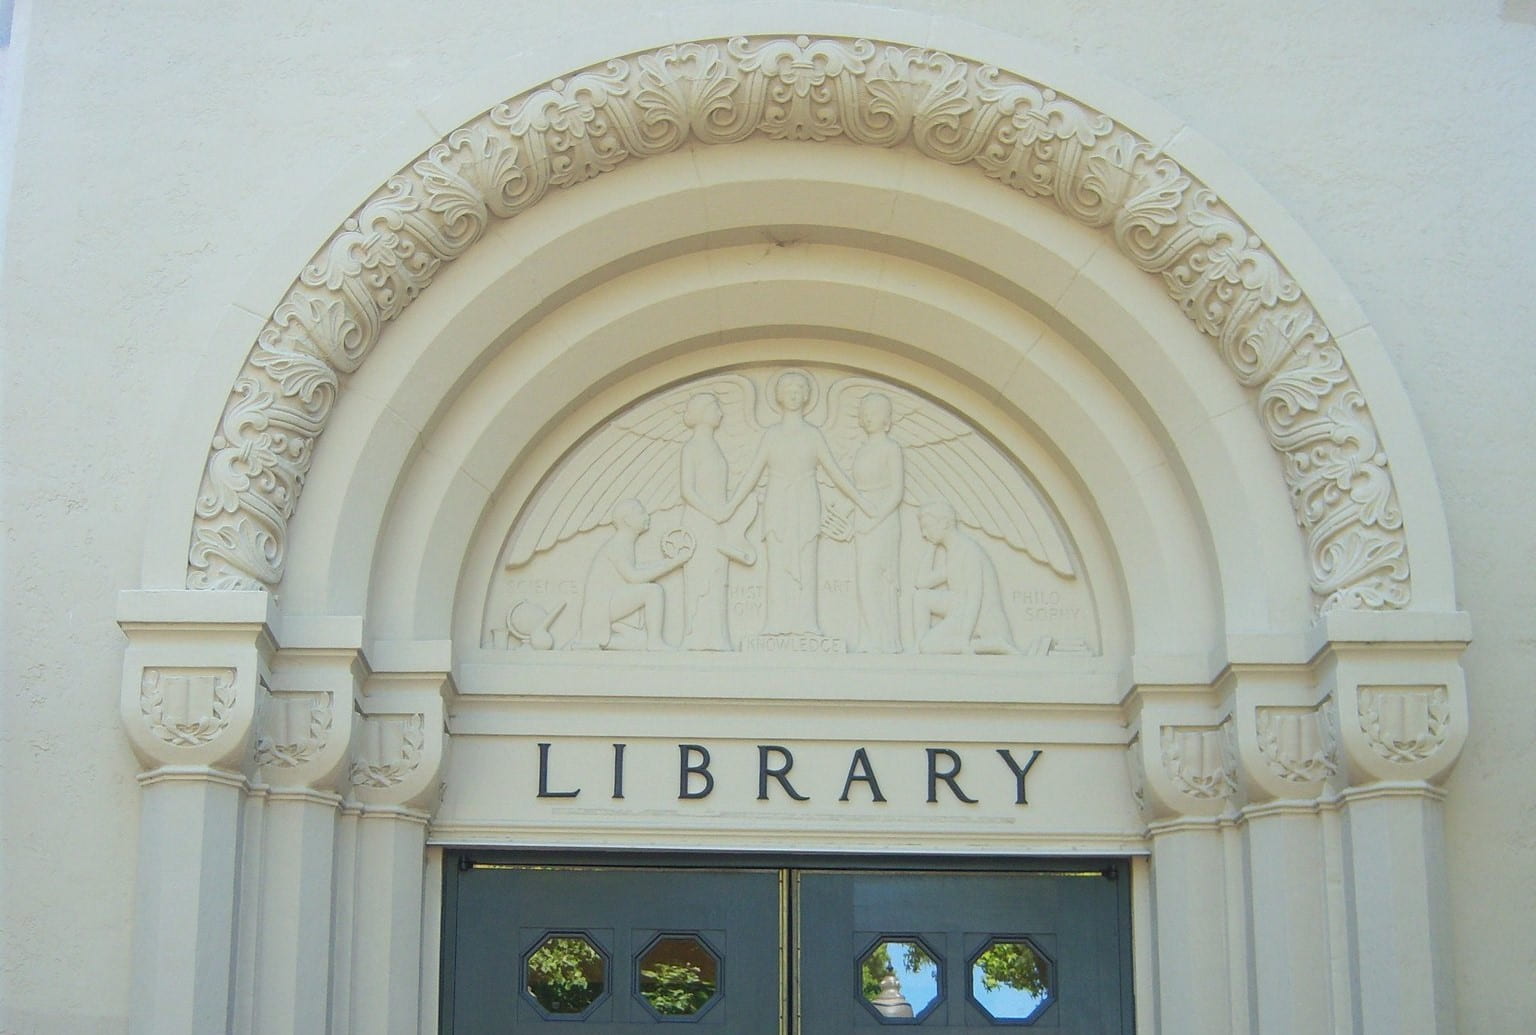 An arched entryway for a building that reads "Library"